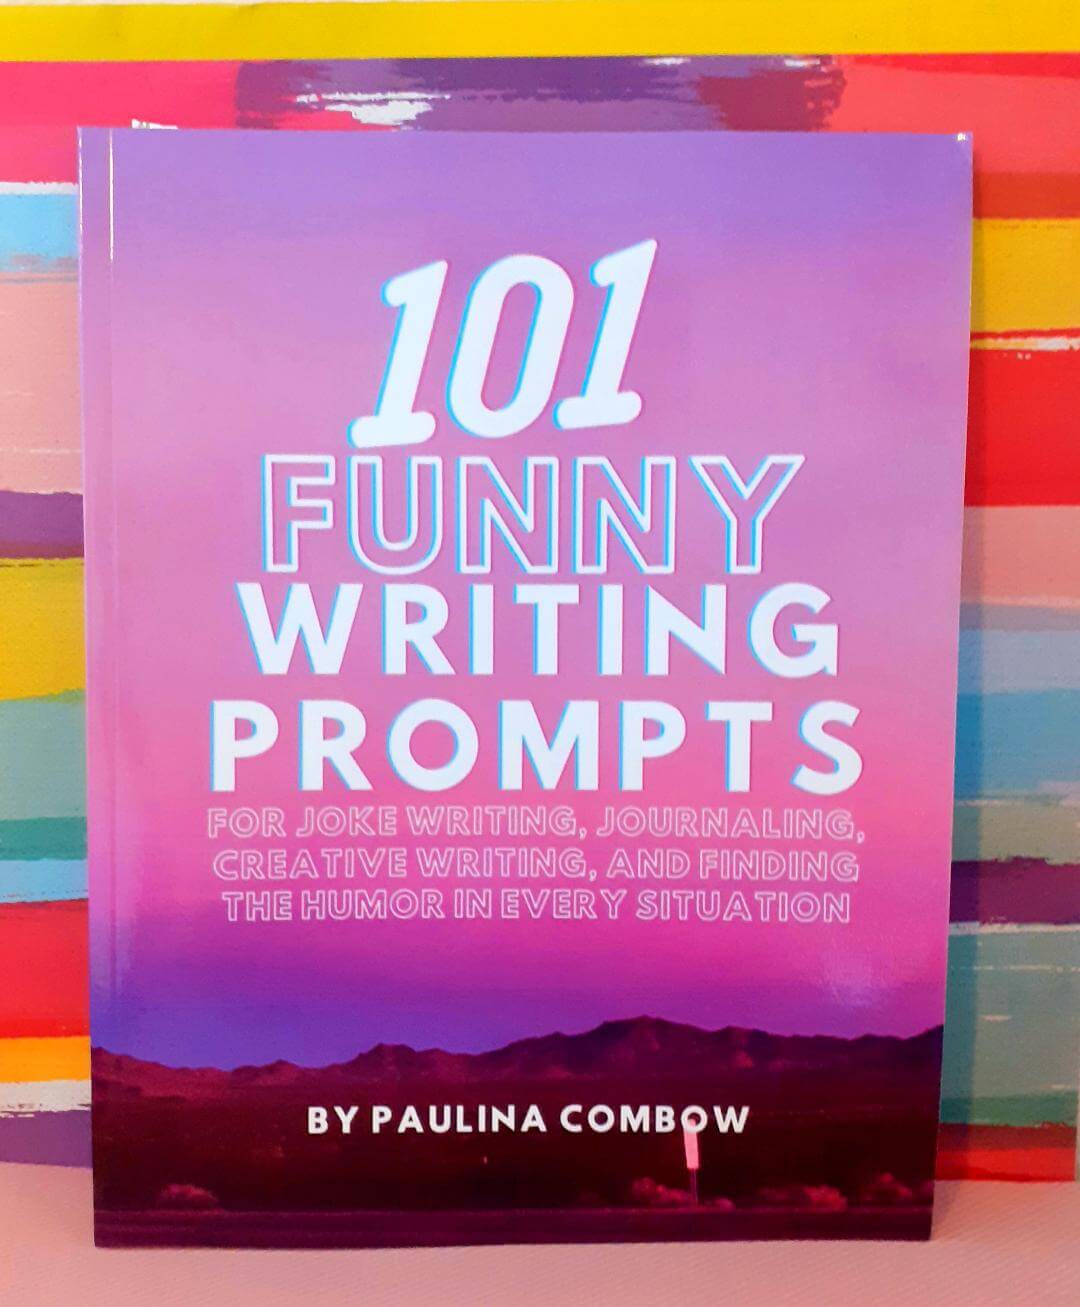 101 Funny Writing Prompts